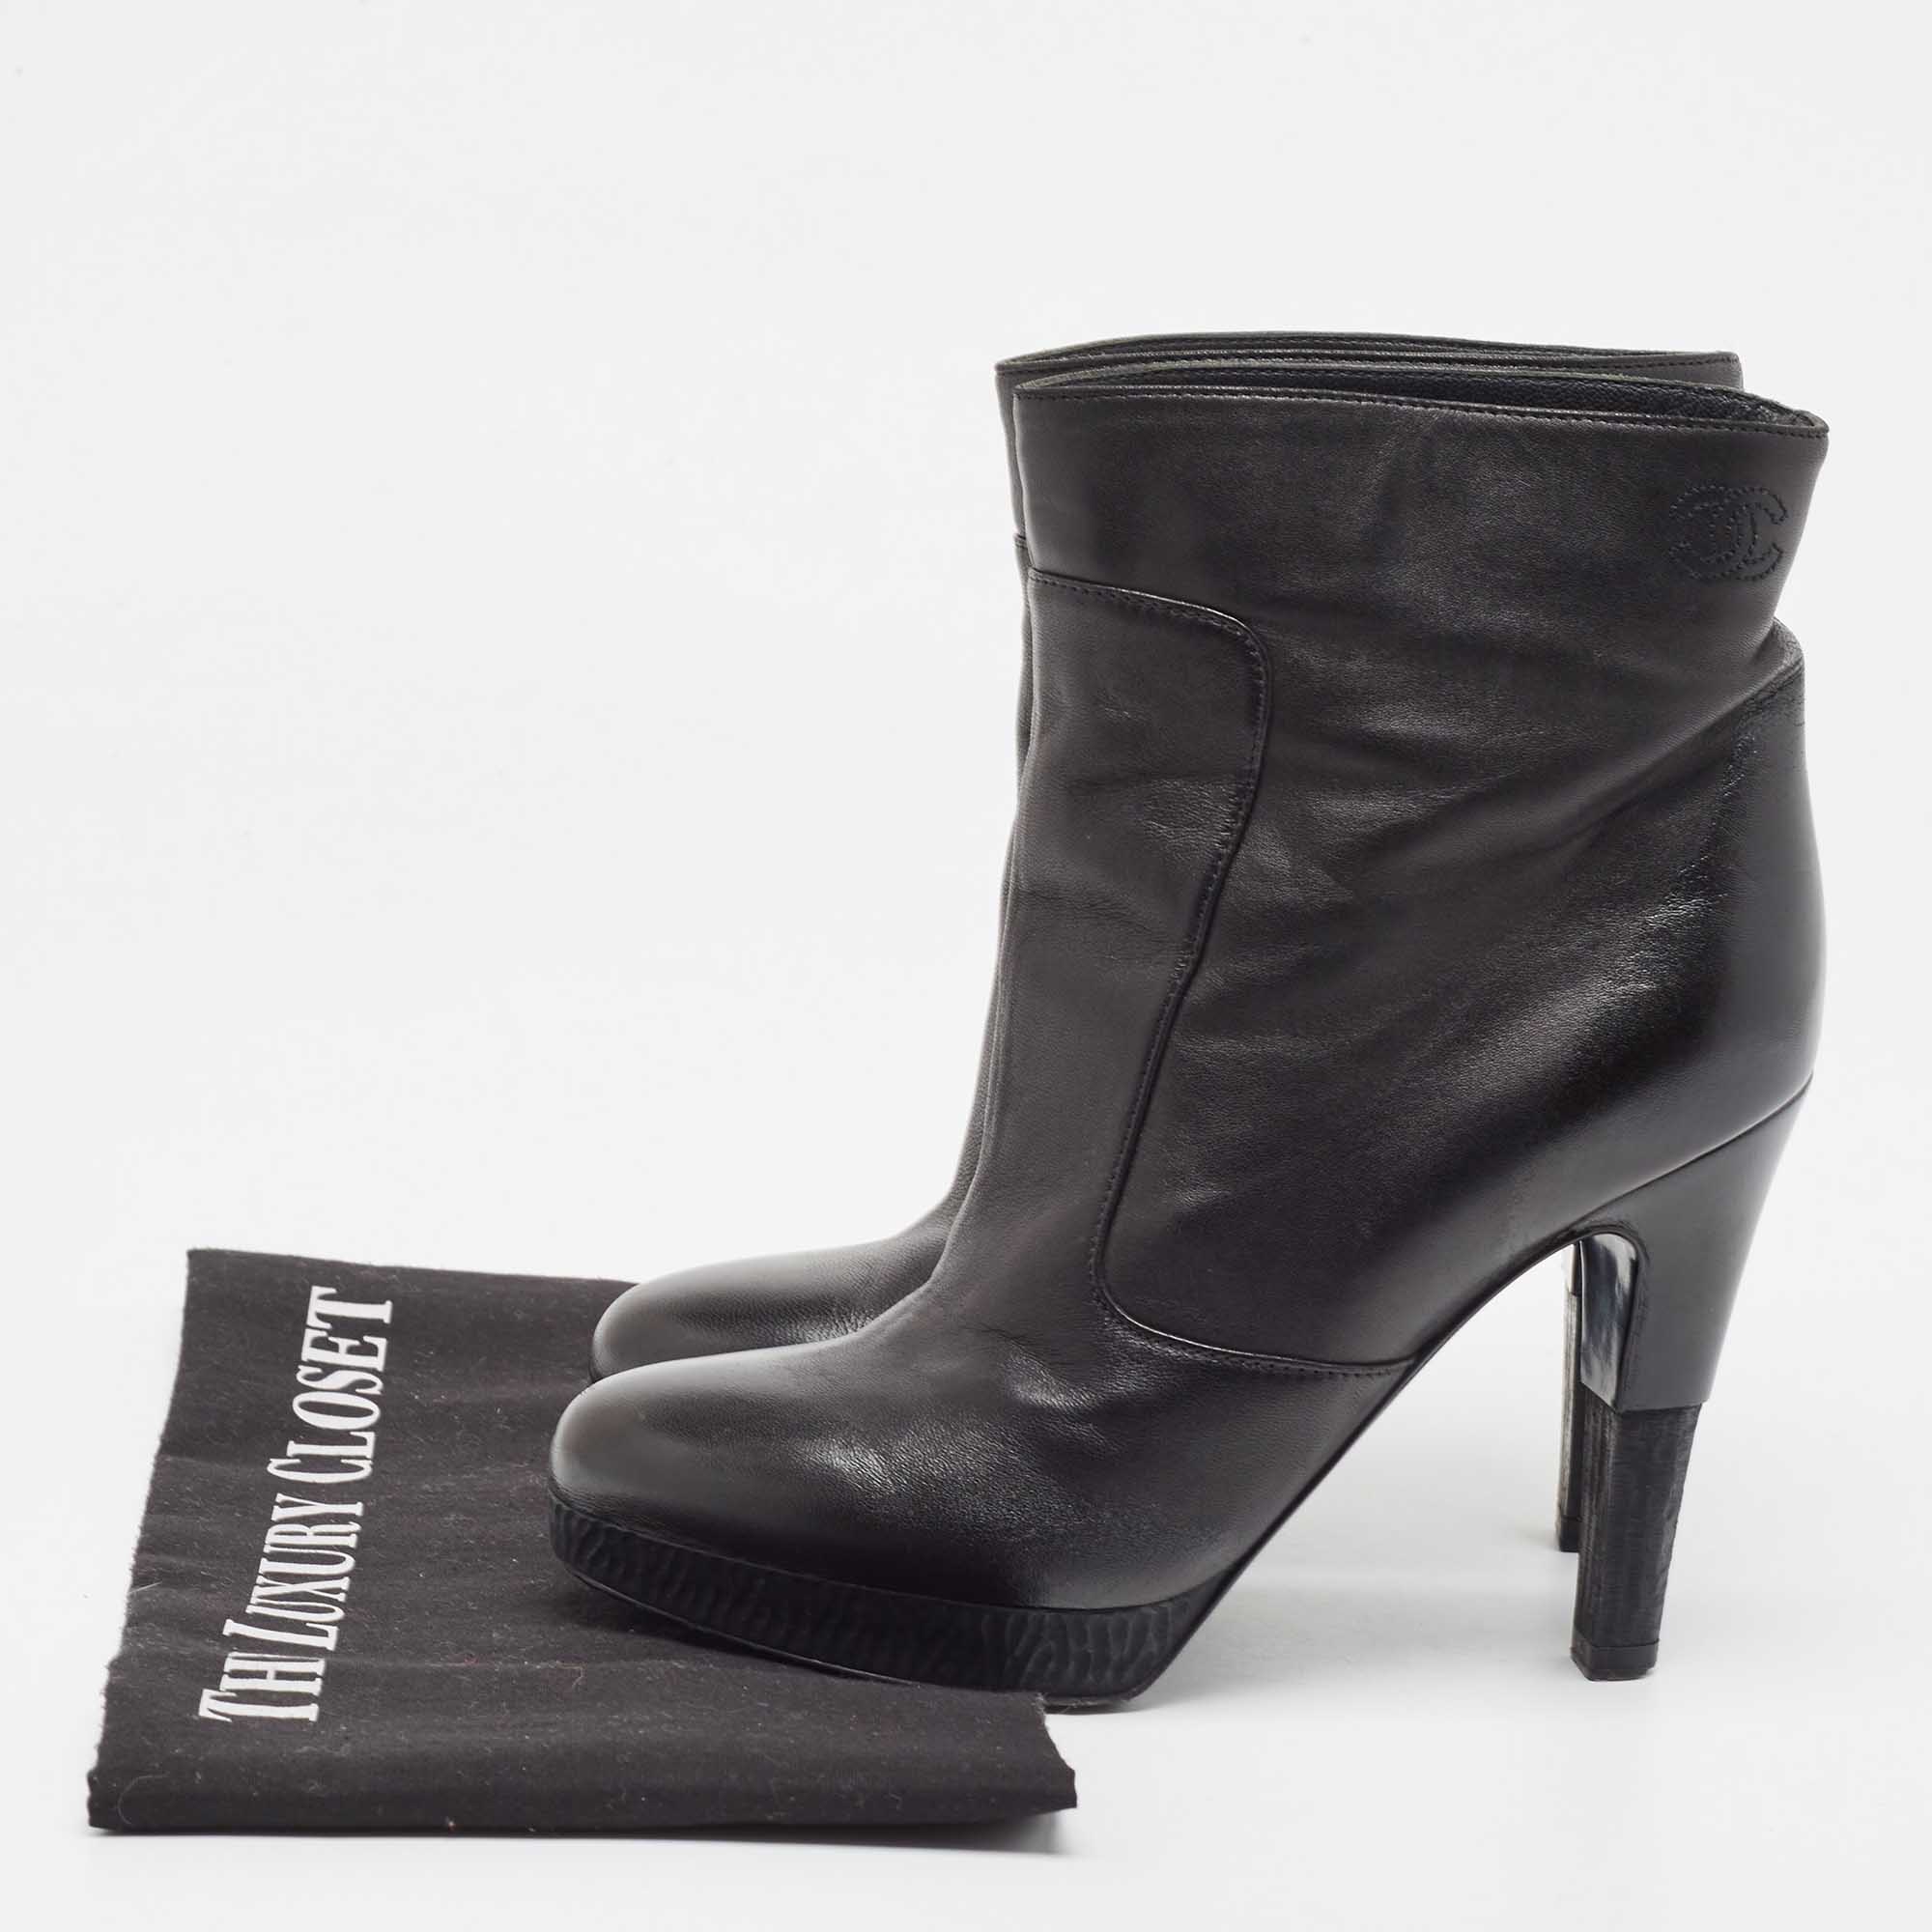 Chanel Black Leather Ankle Boots Size 36.5